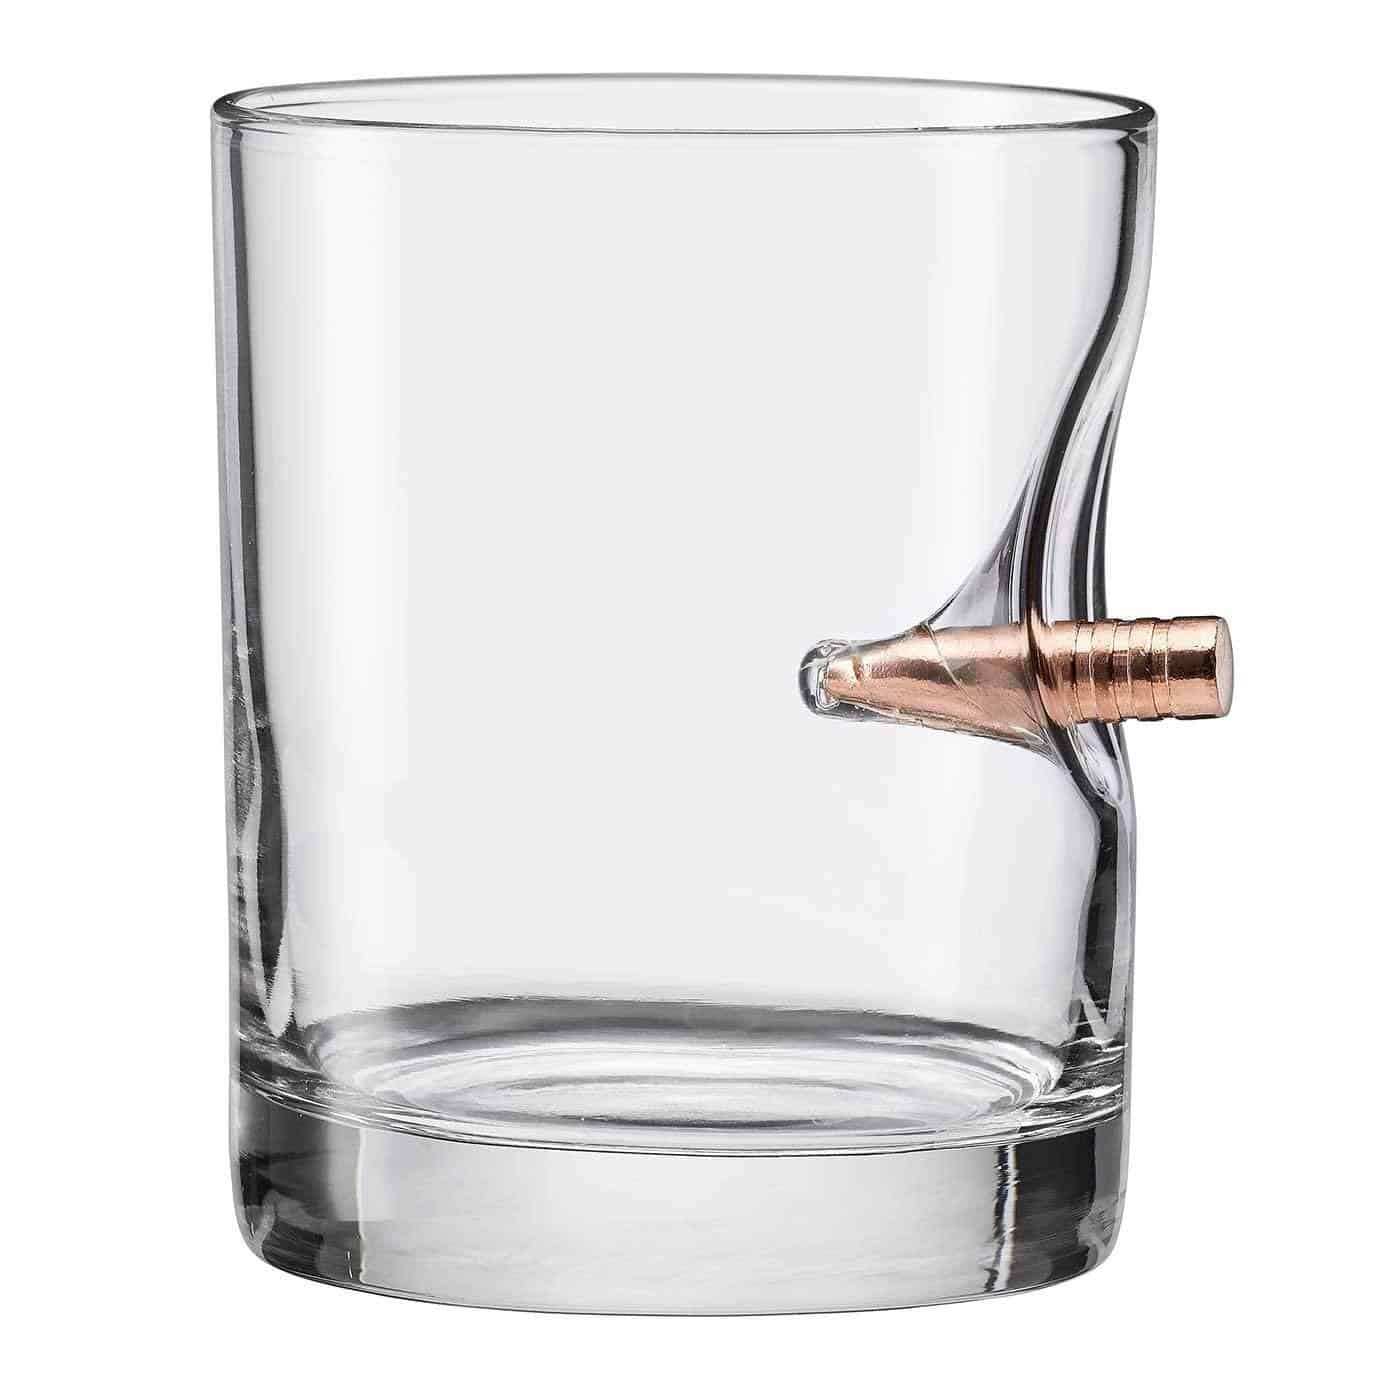 The Literal Shot Glass